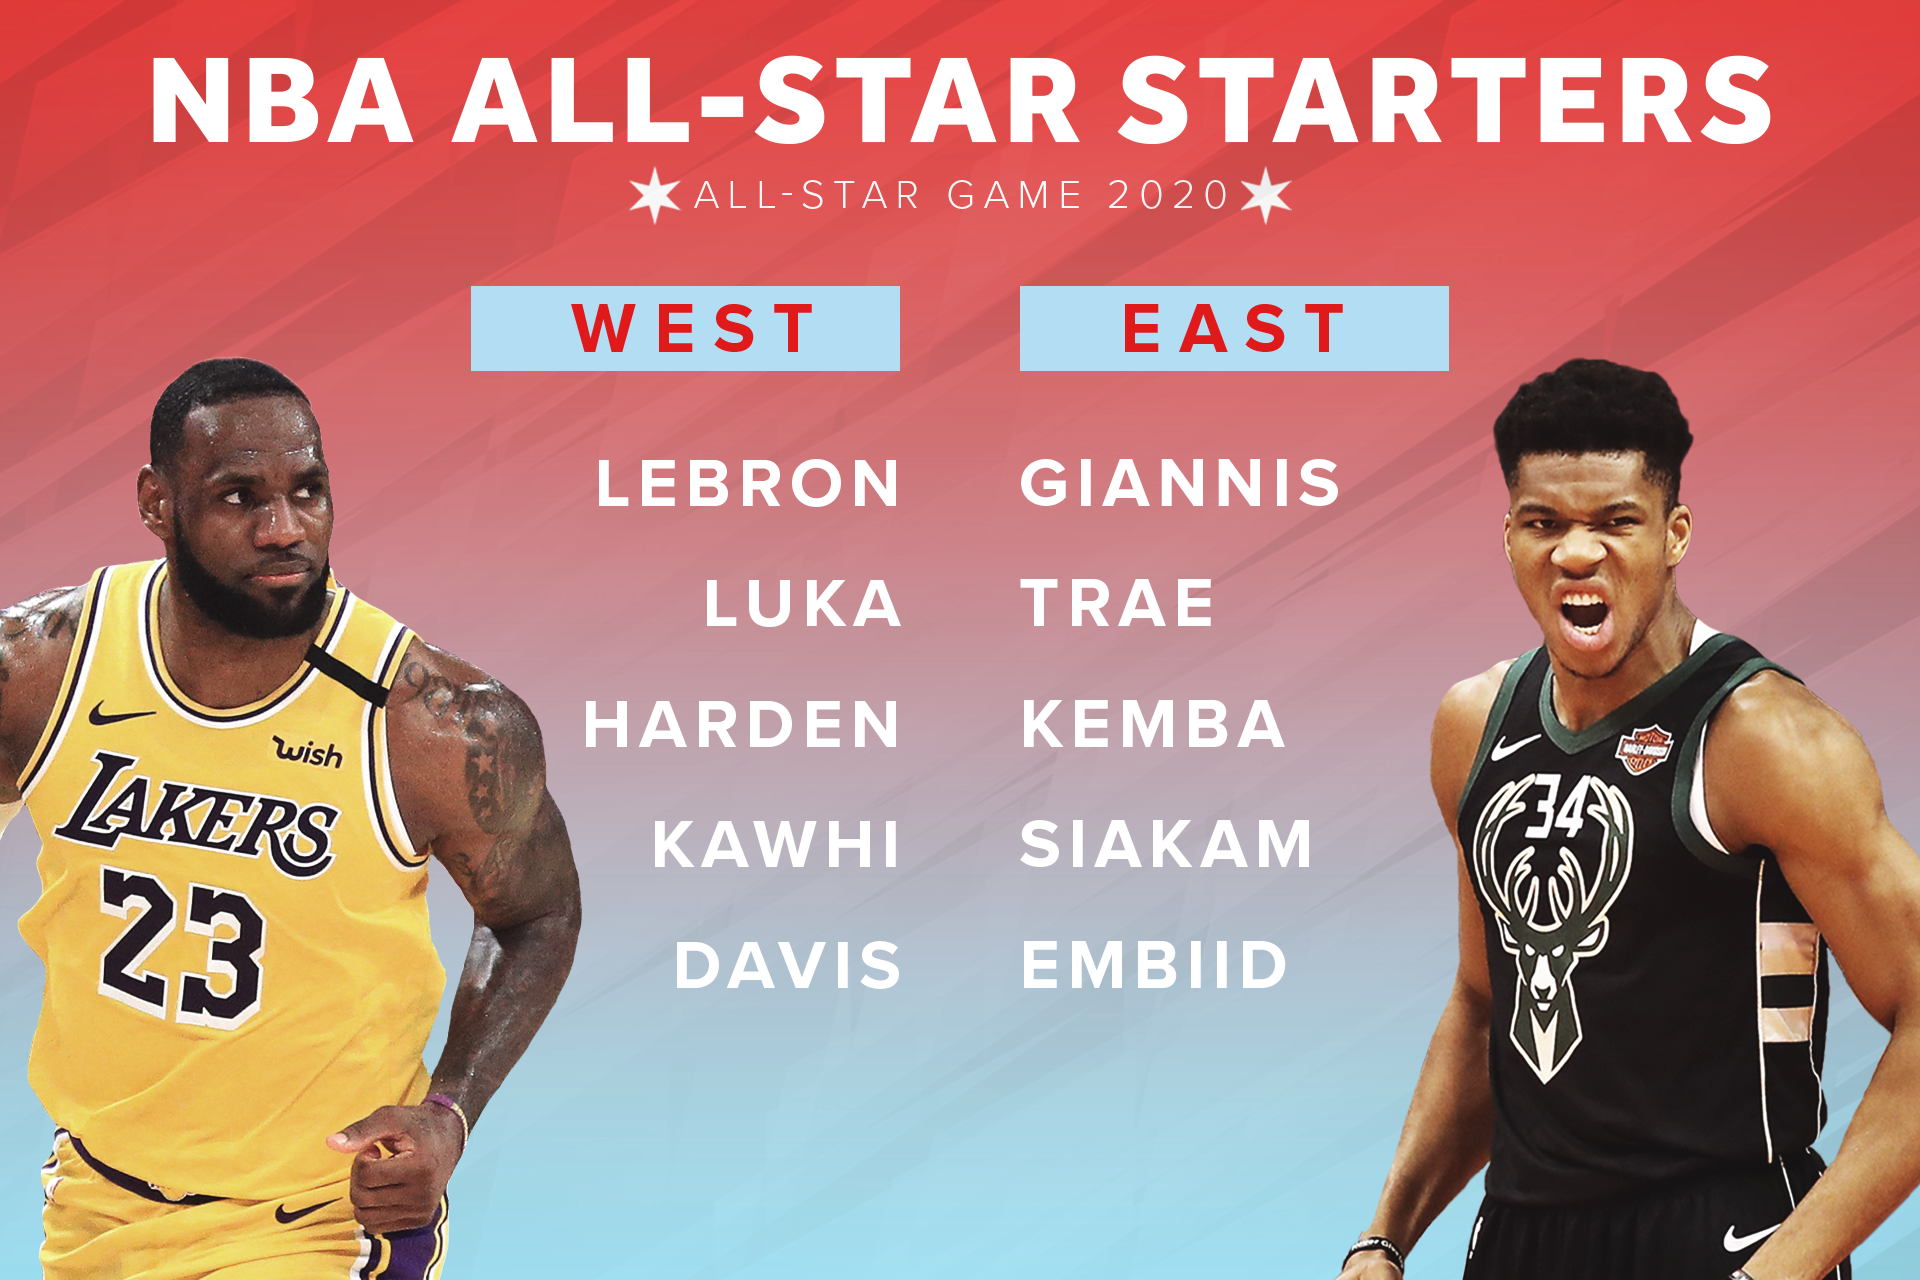 Nba All Star Game 2020 Rosters Captains And Starters Revealed For Draft Format Bleacher Report Latest News Videos And Highlights